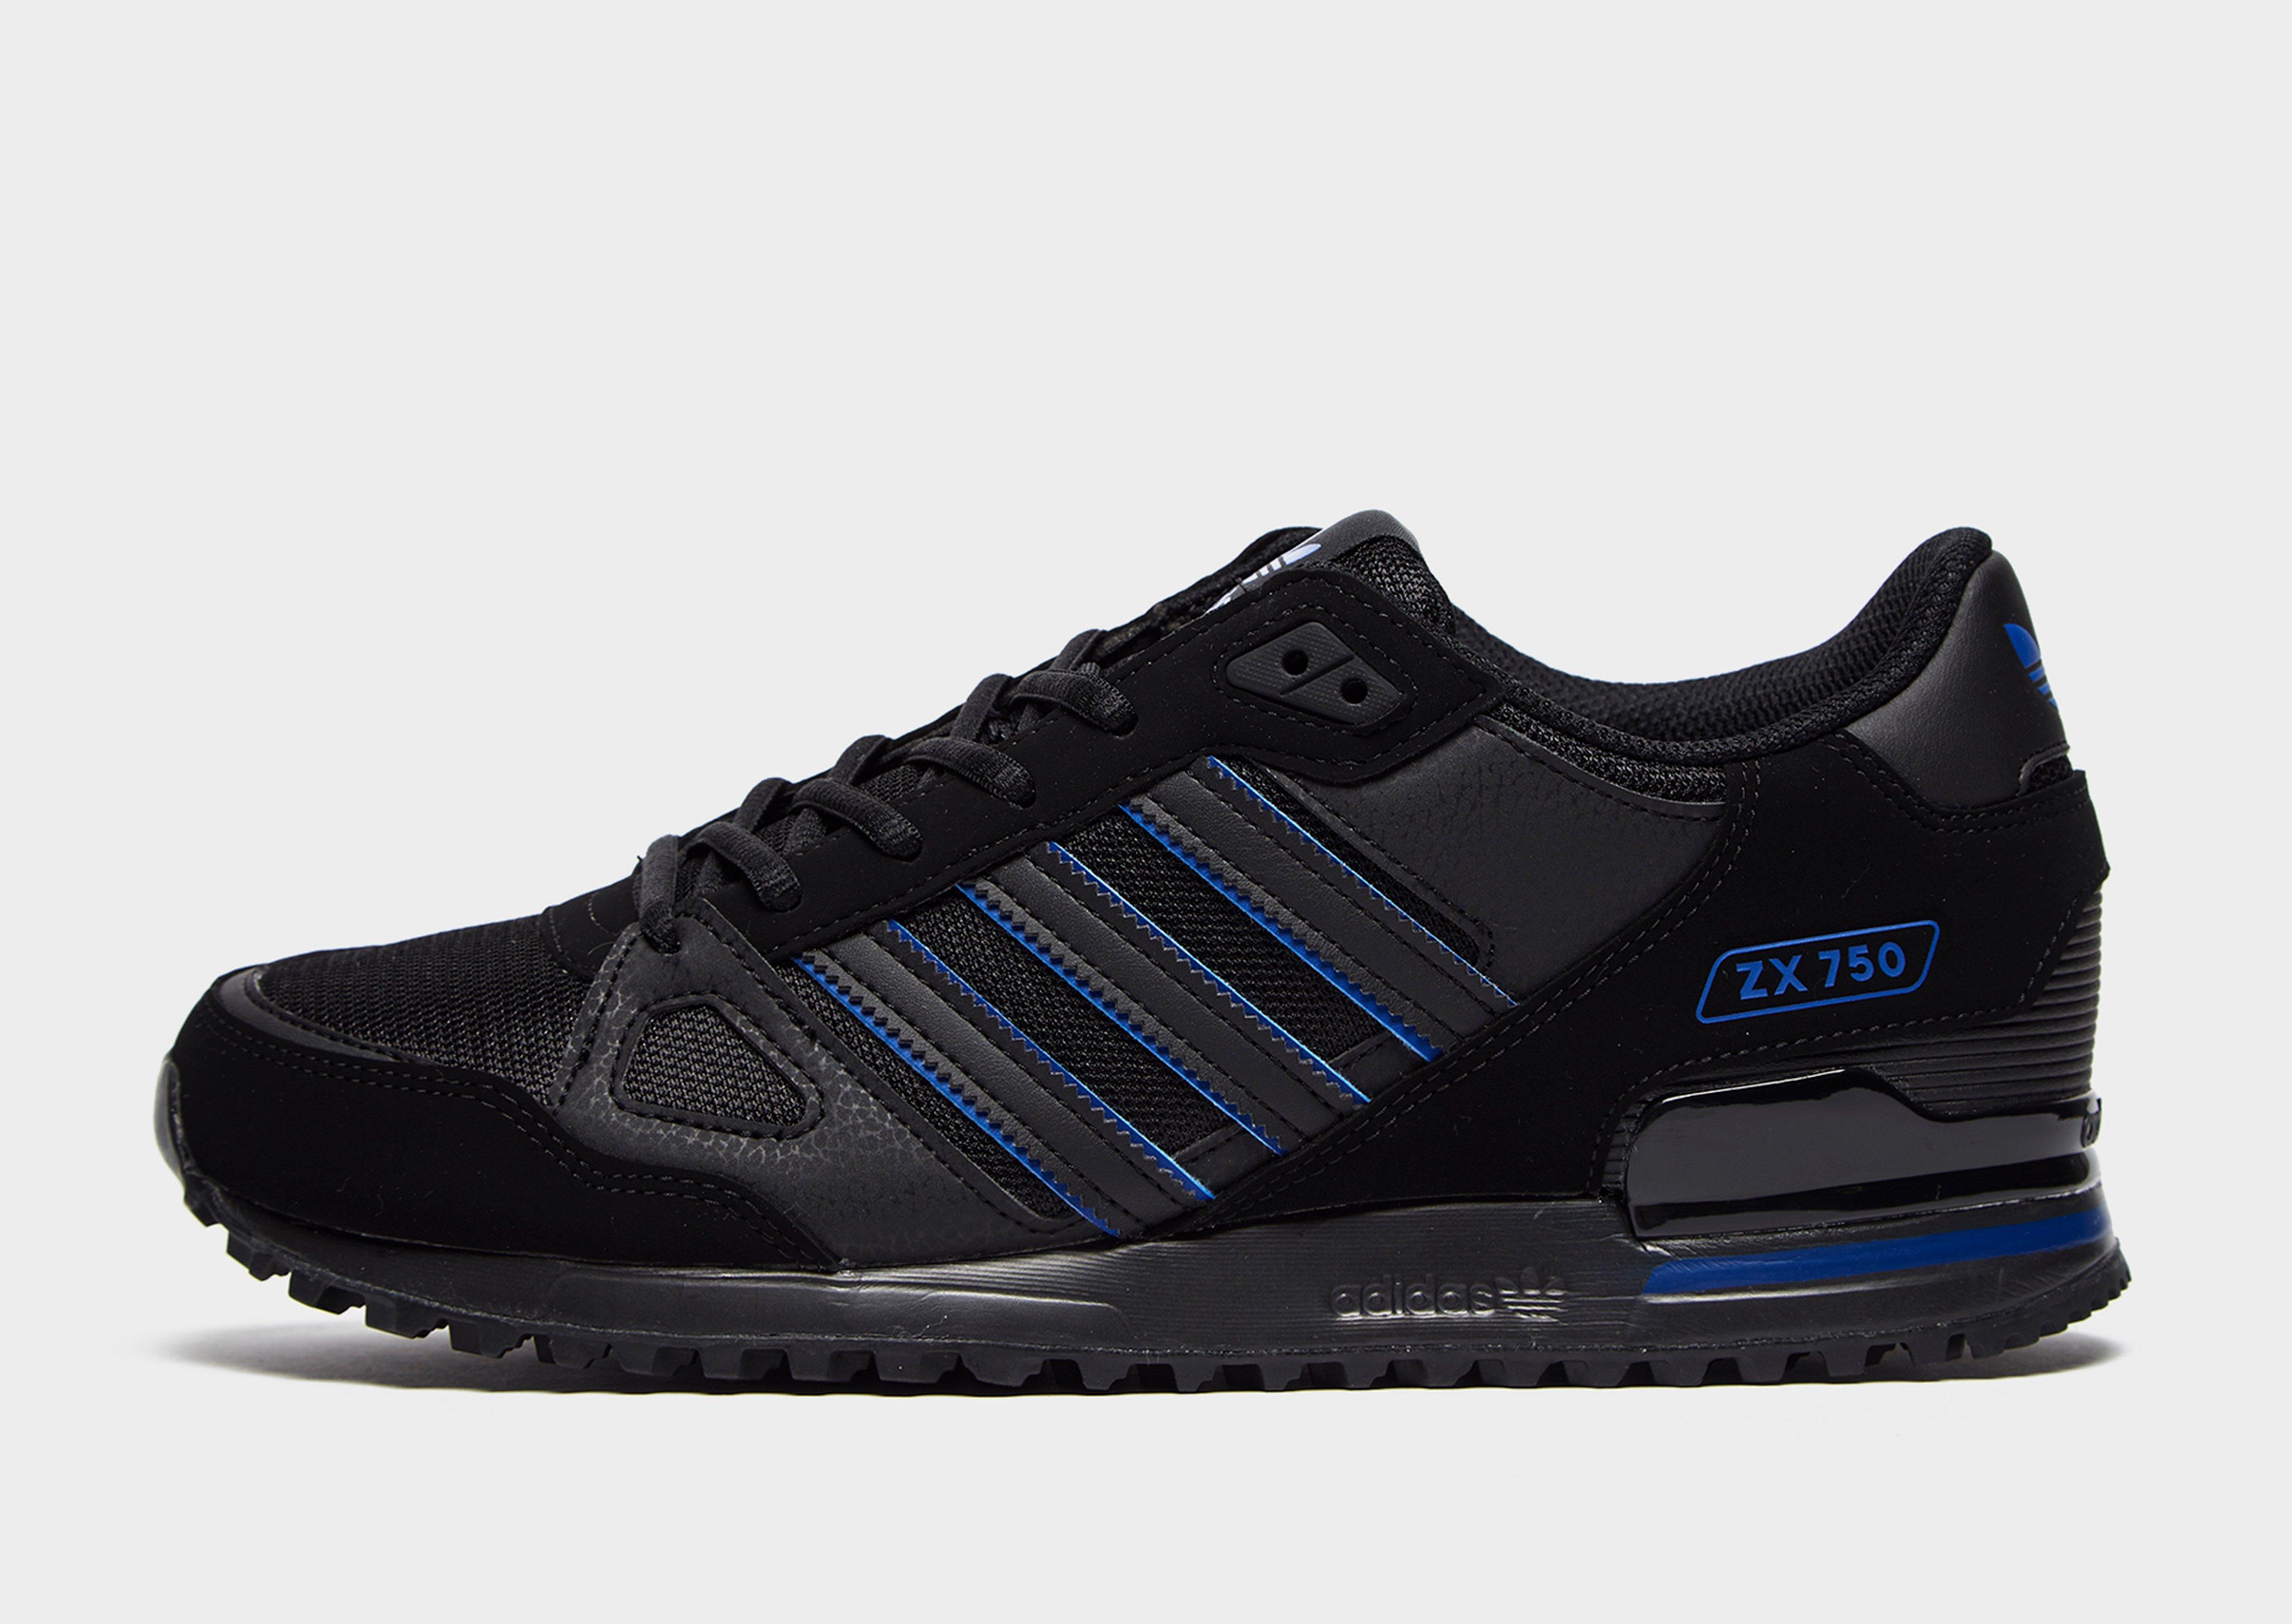 adidas zx 750 nere gialle